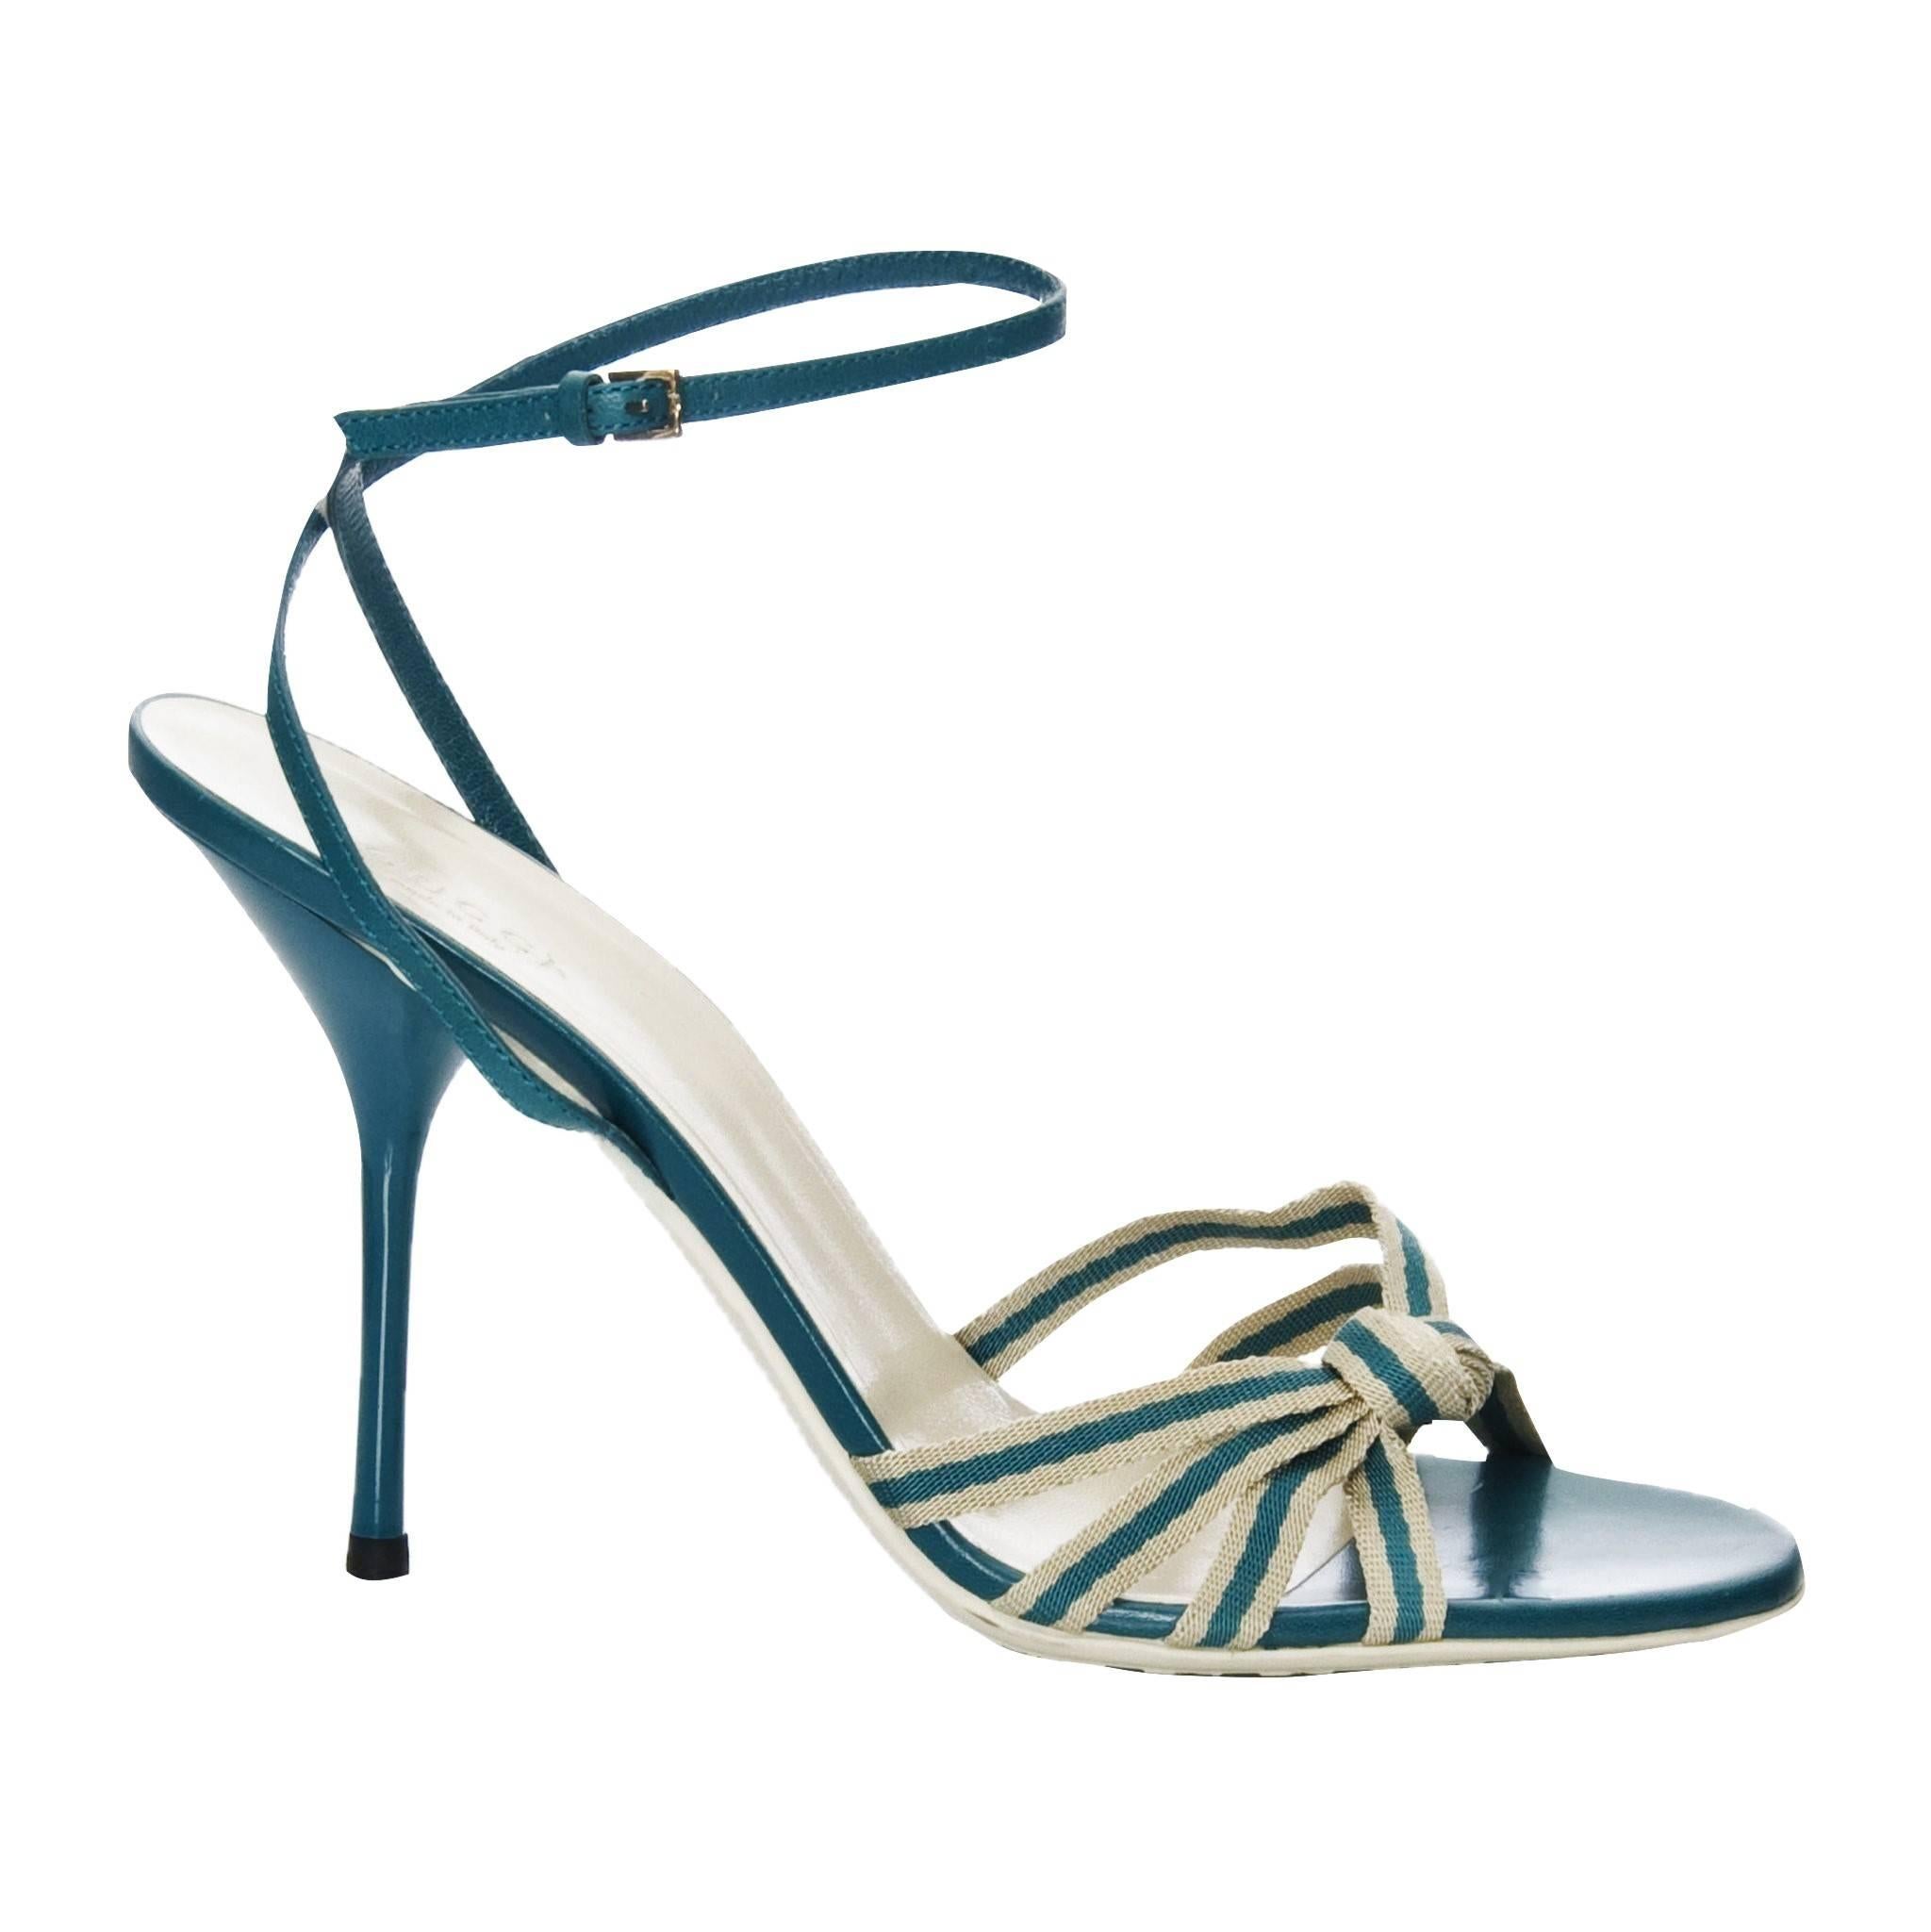 New Gucci Mirabelle Teal Heels